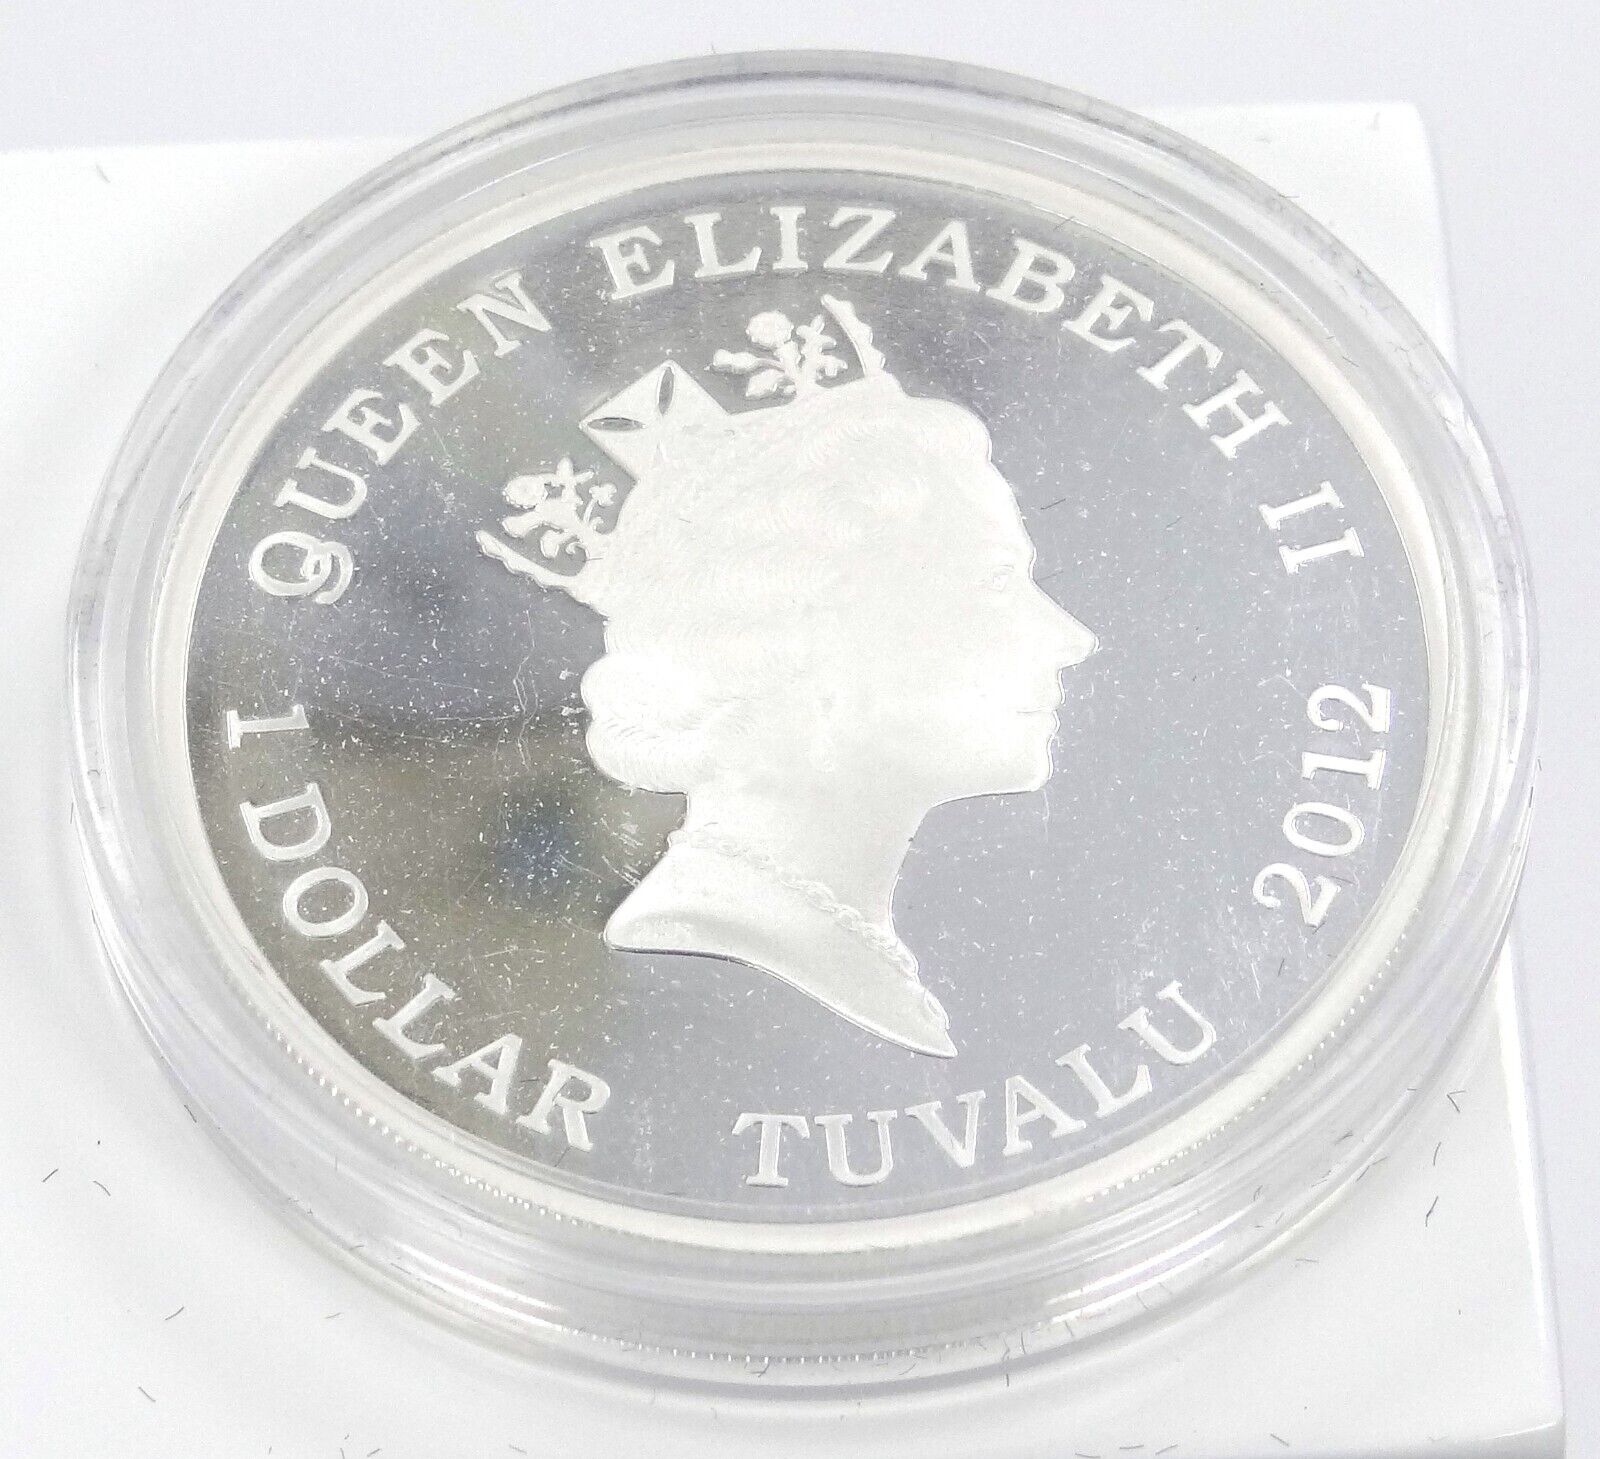 1 Oz Silver Coin 2012 $1 Tuvalu Ships That Changed The World Proof - Cutty Sark-classypw.com-1